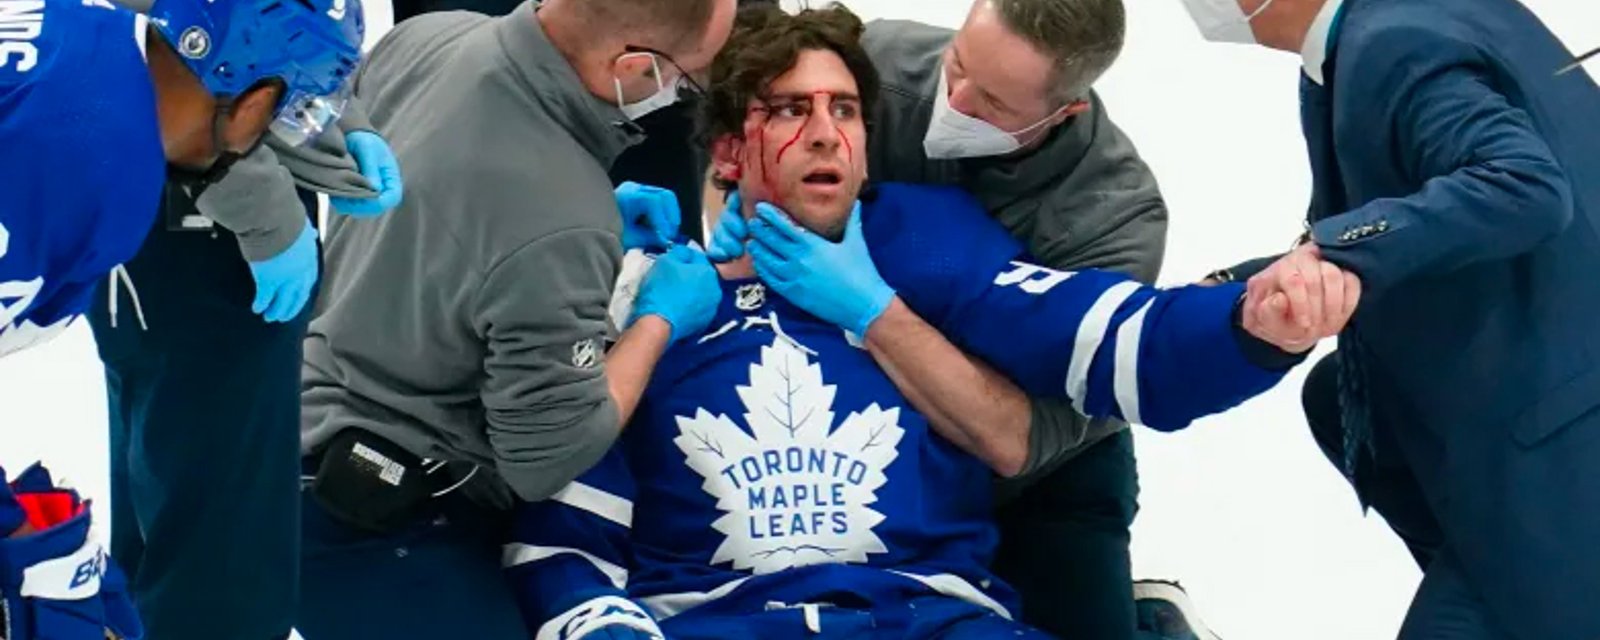 Leafs share official update on Tavares and assessment by neurosurgical team 